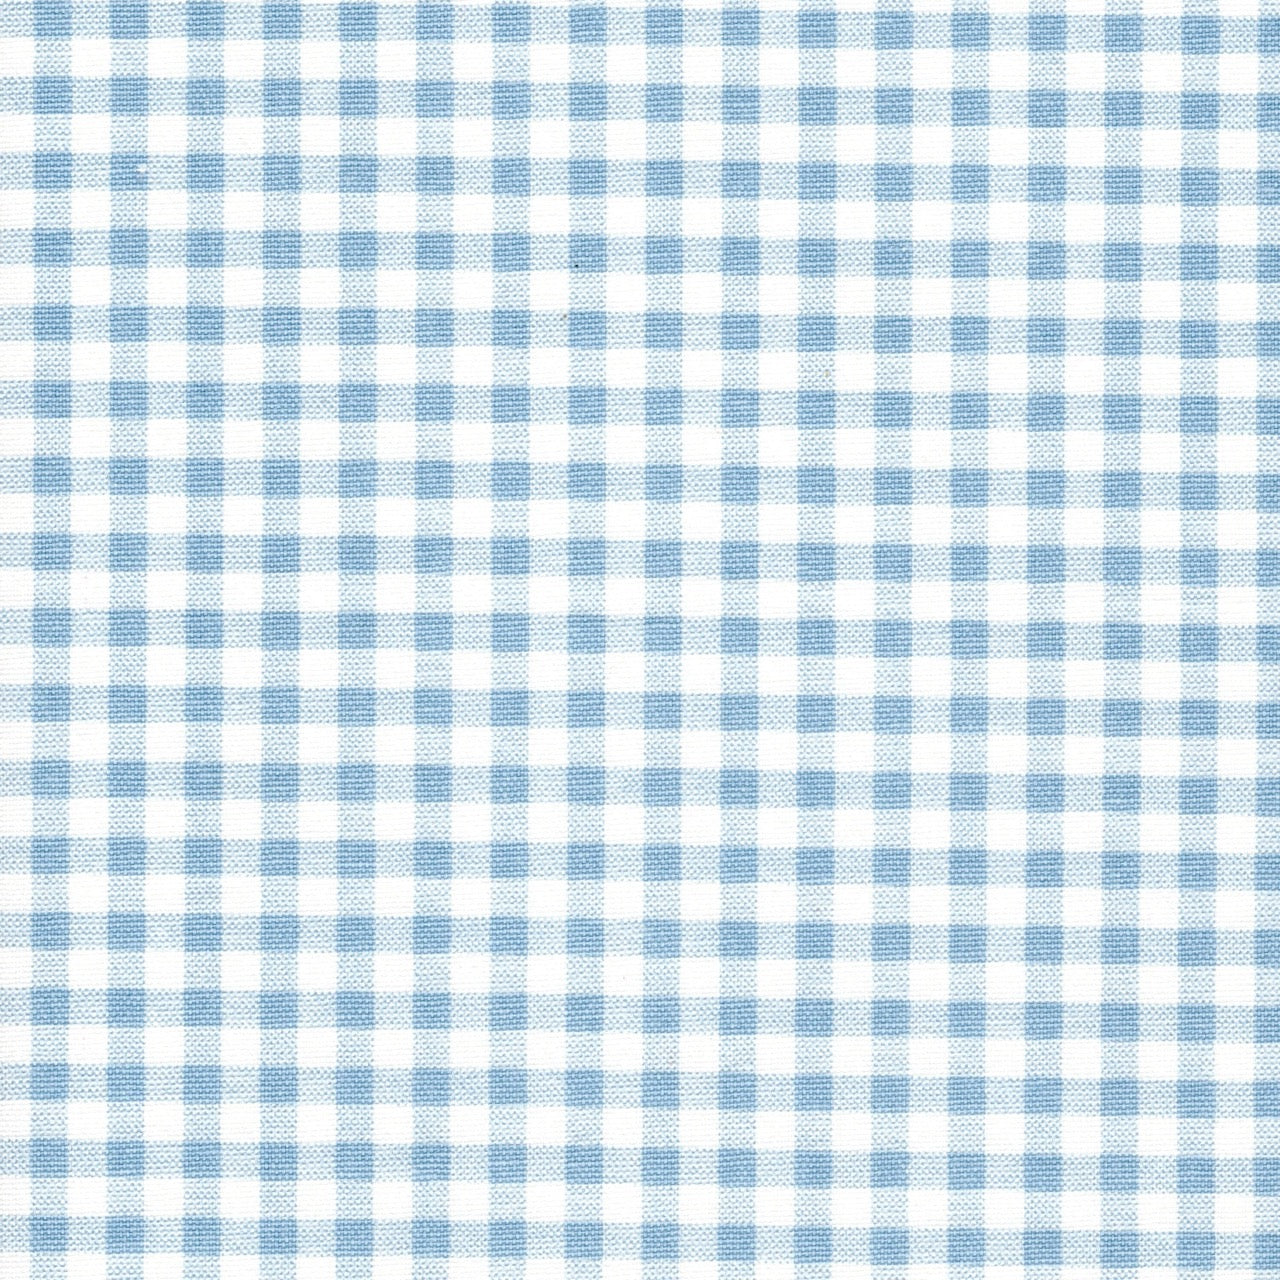 Pillow Sham in Weathered Blue Large Gingham Check on White